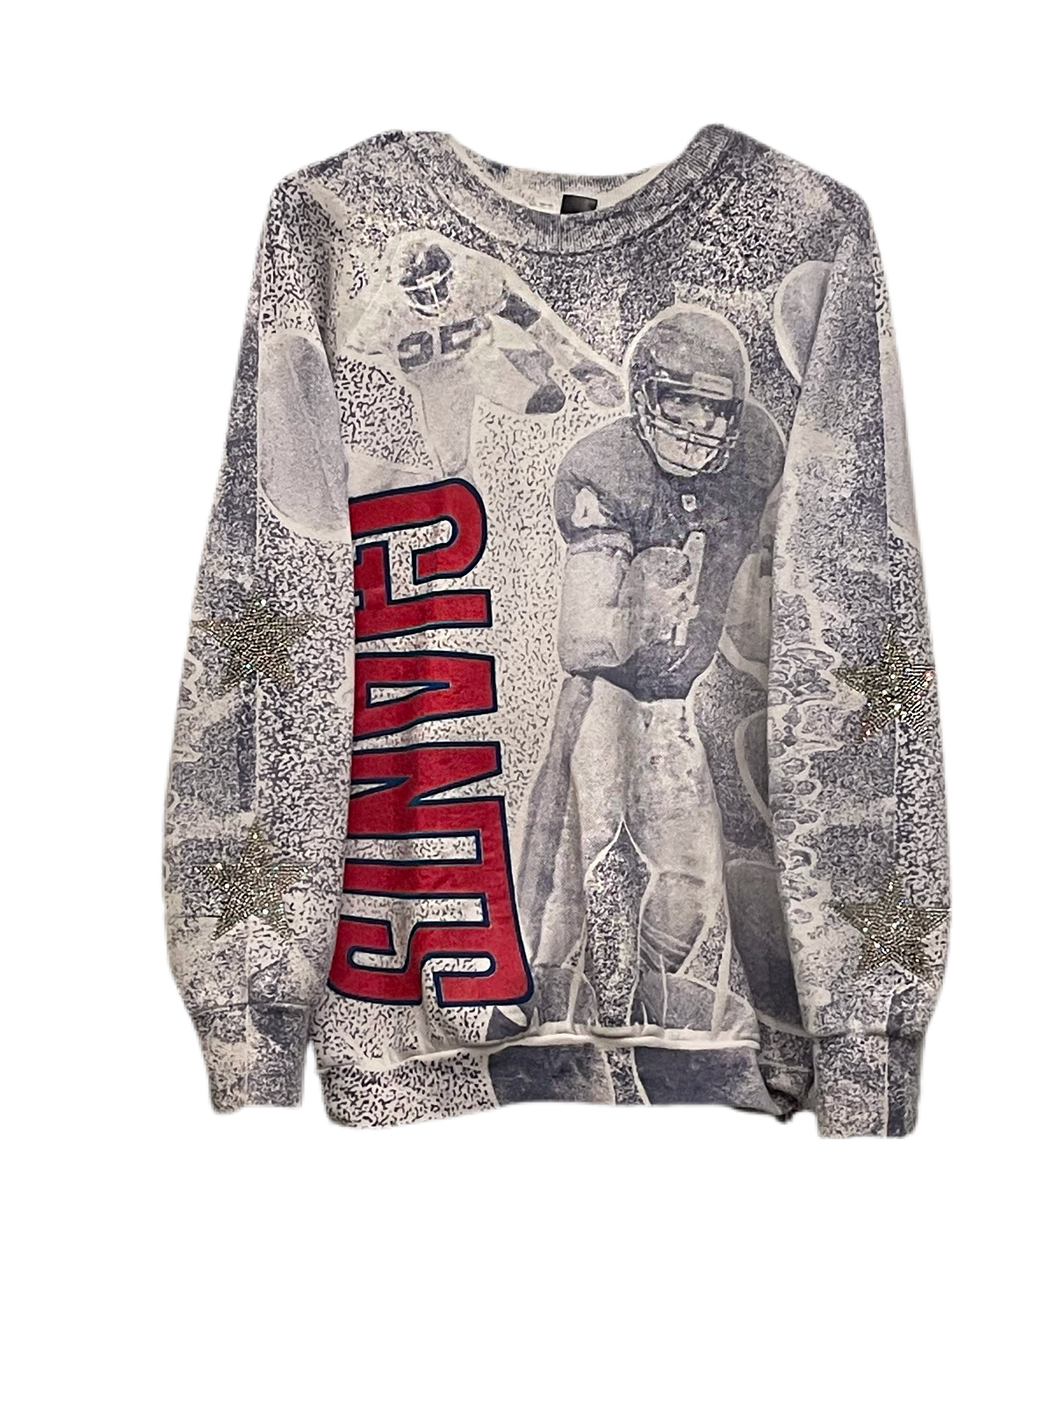 NY Giants, NFL “Rare Find” One of a KIND Vintage Sweatshirt with Crystal Star Design